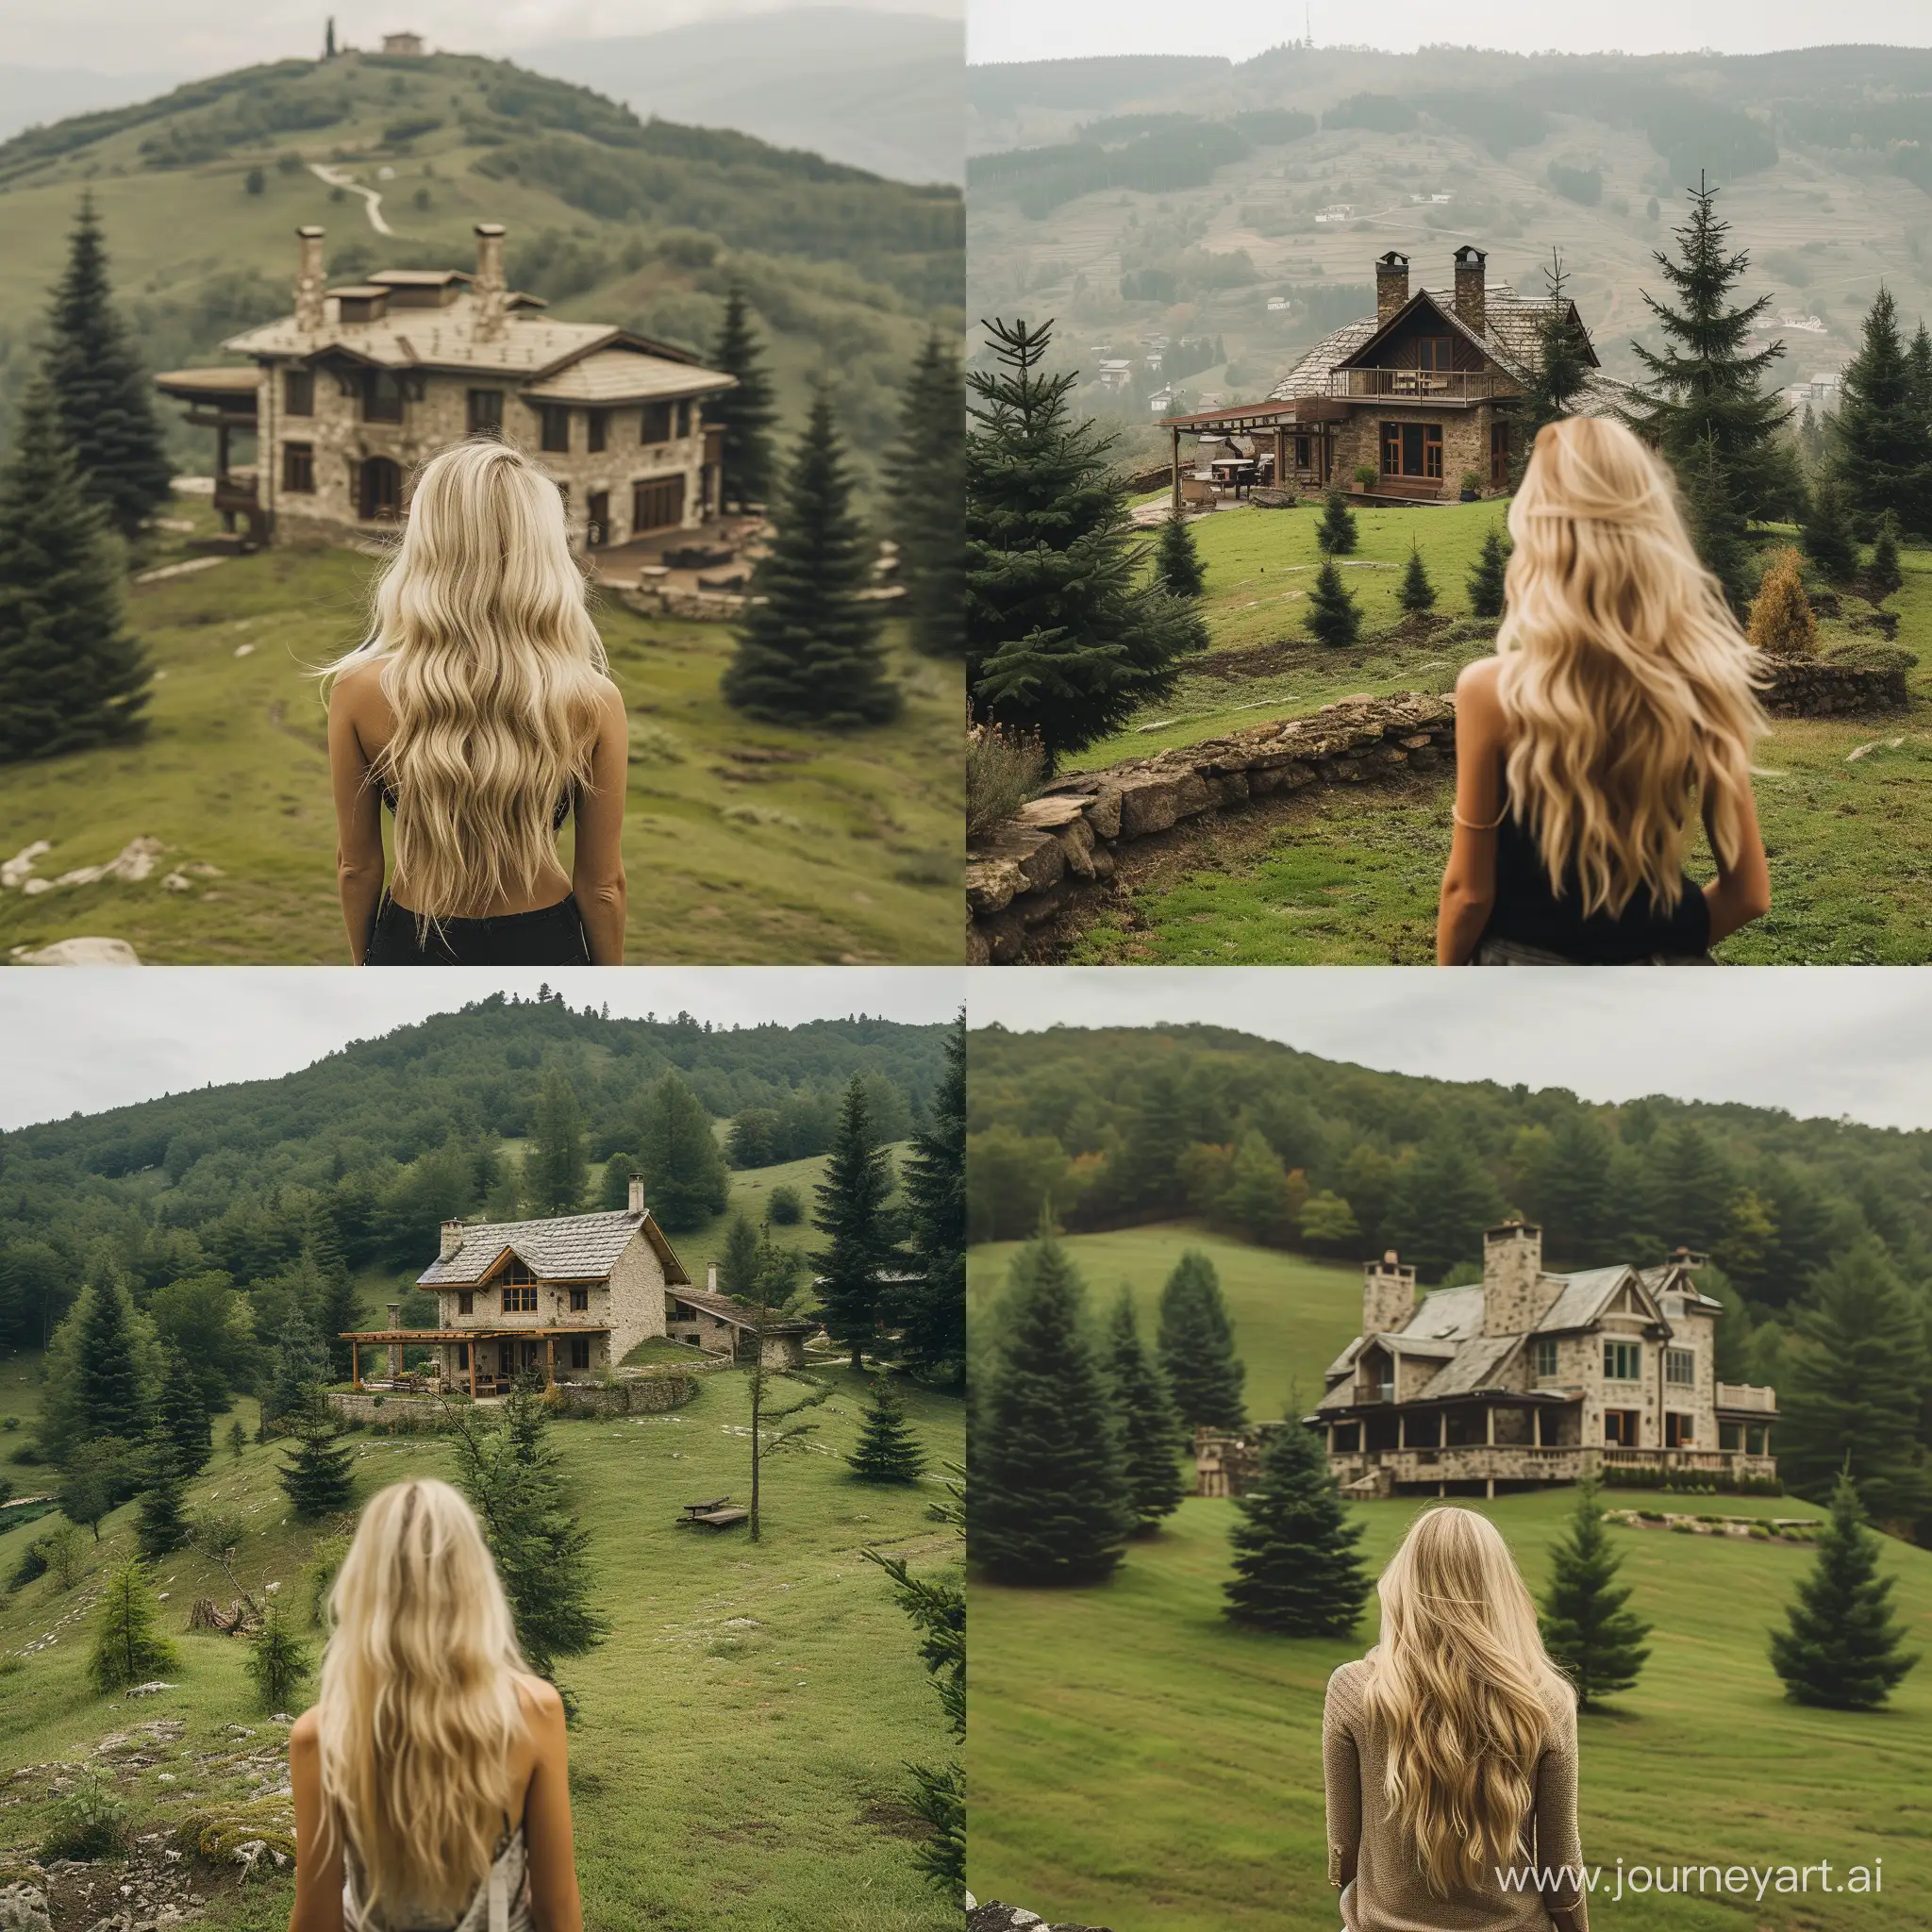 Serene-Blonde-Woman-Overlooking-Idyllic-Hill-Landscape-with-Stone-House-and-Wooden-Terrace